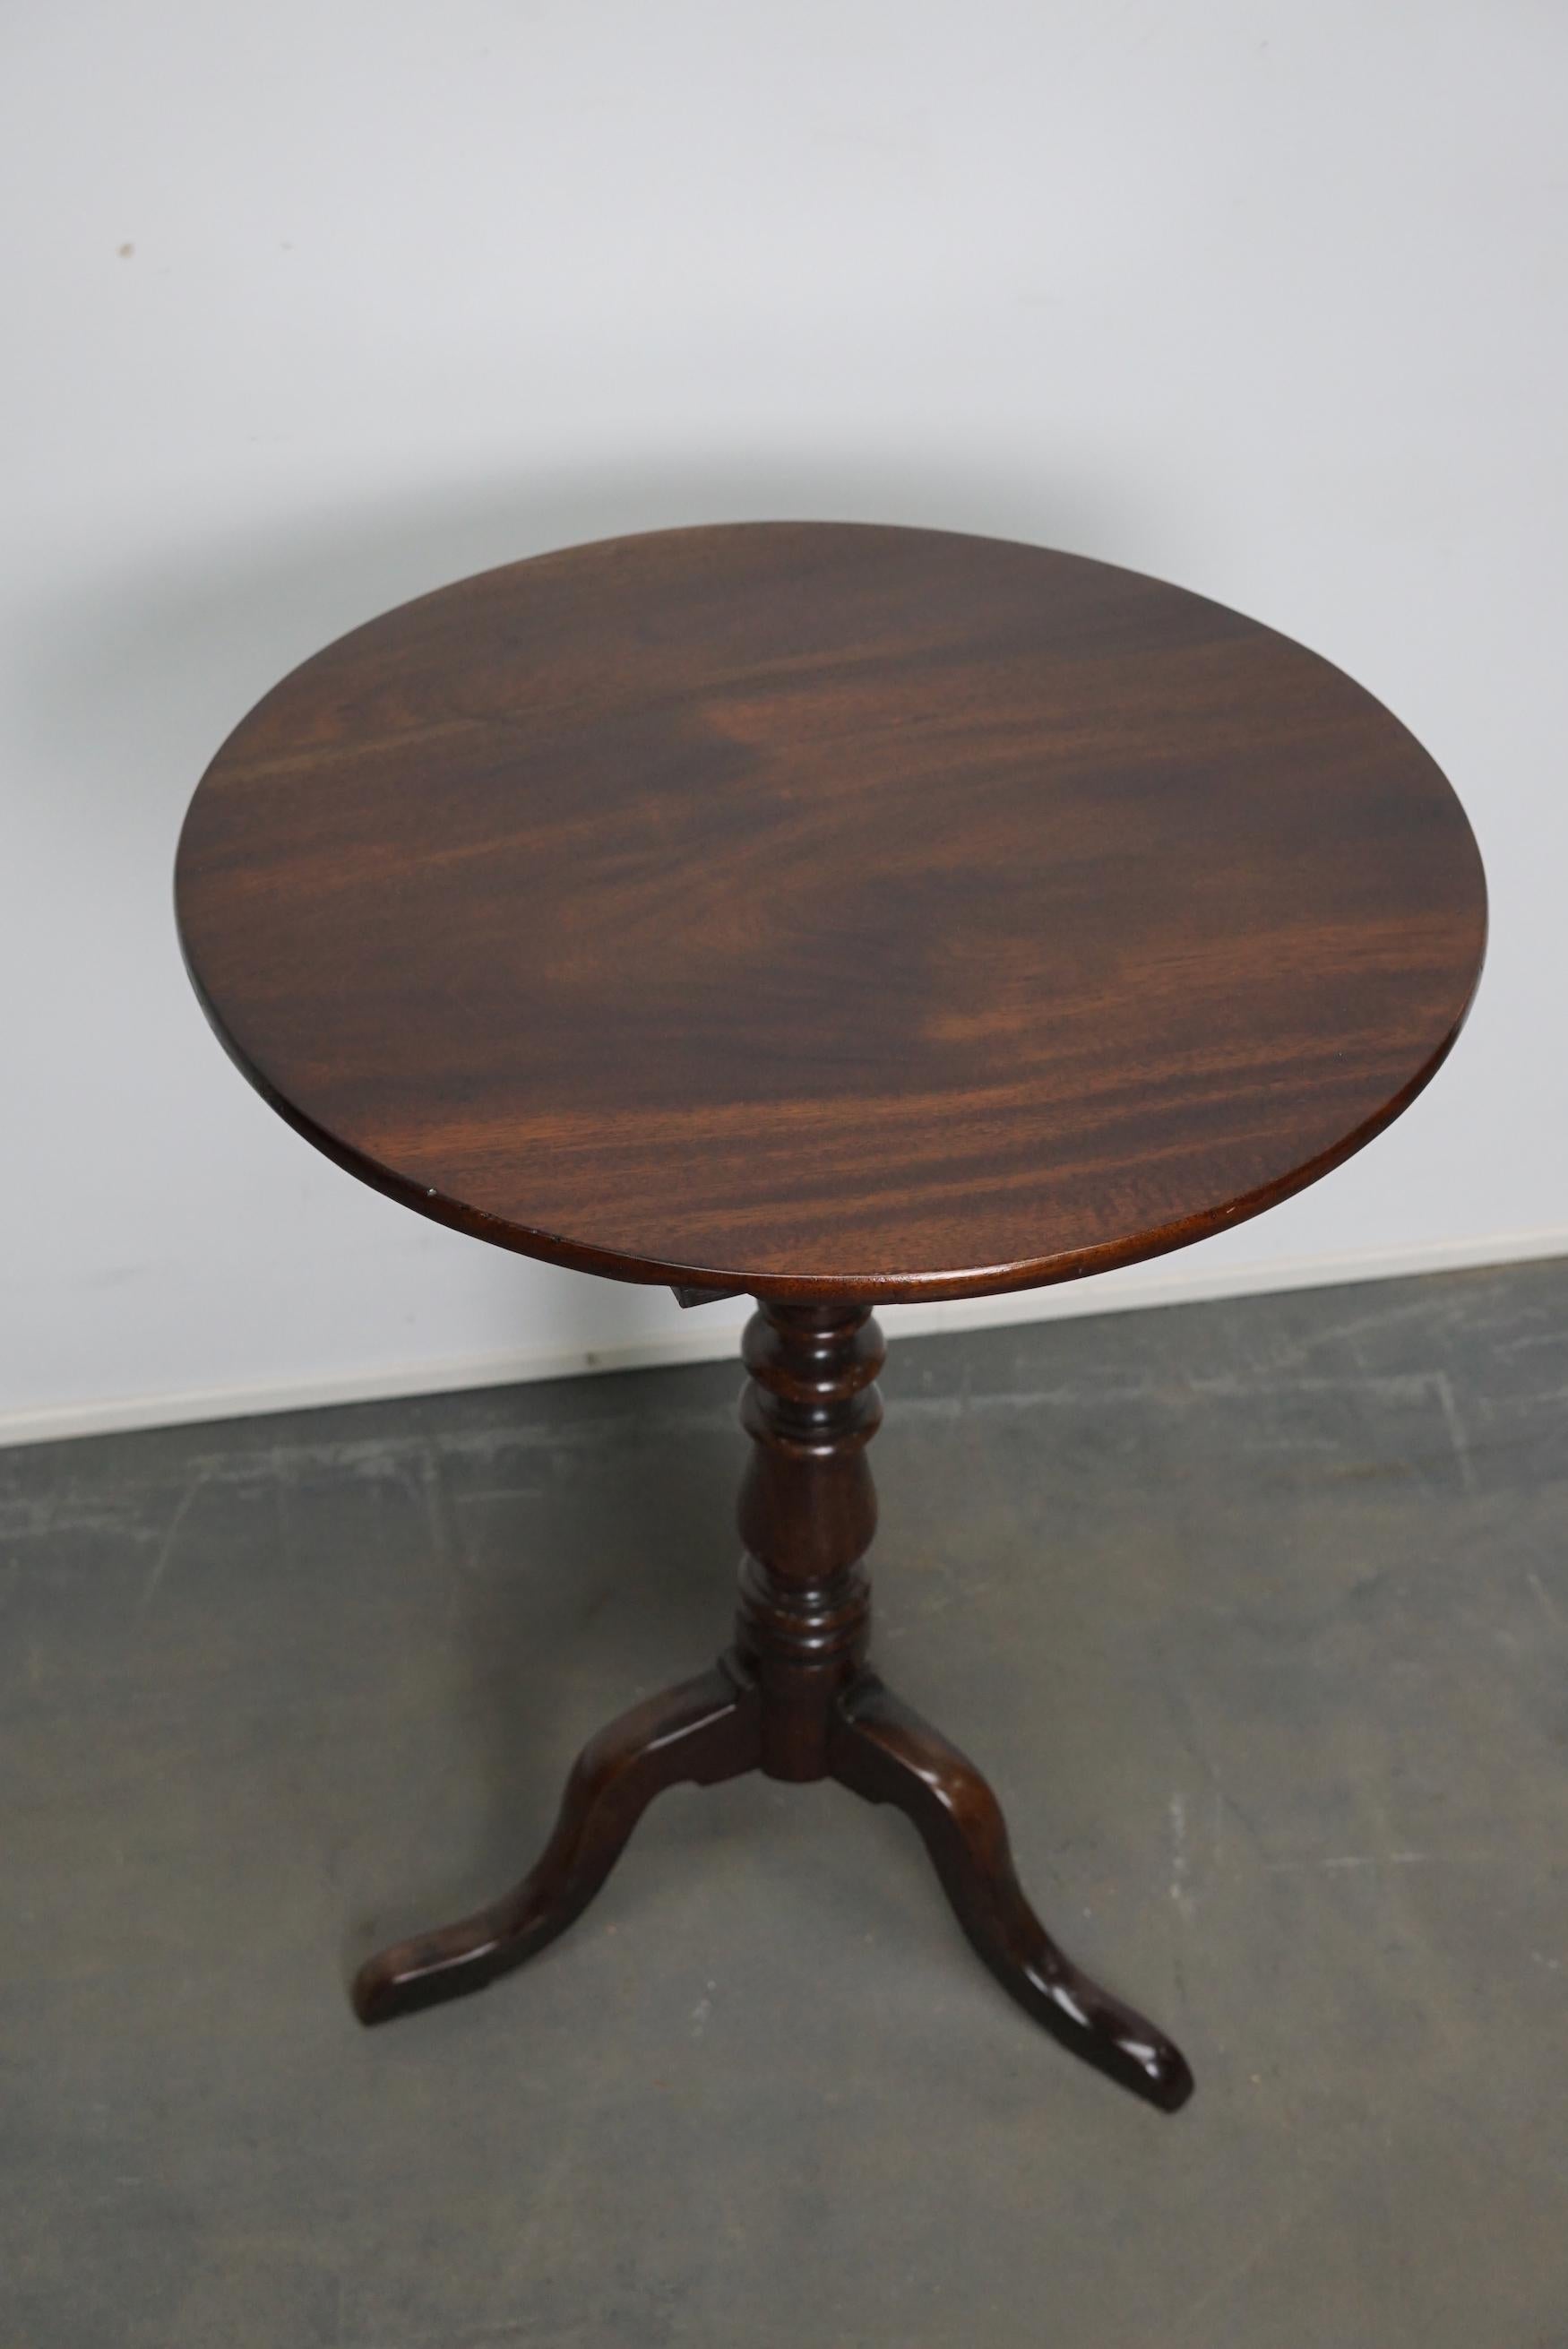 Lovely mahogany wine table from the mid-19th century. This table features a solid mahogany top on tripod legs. The table has been restored and in a very nice condition.